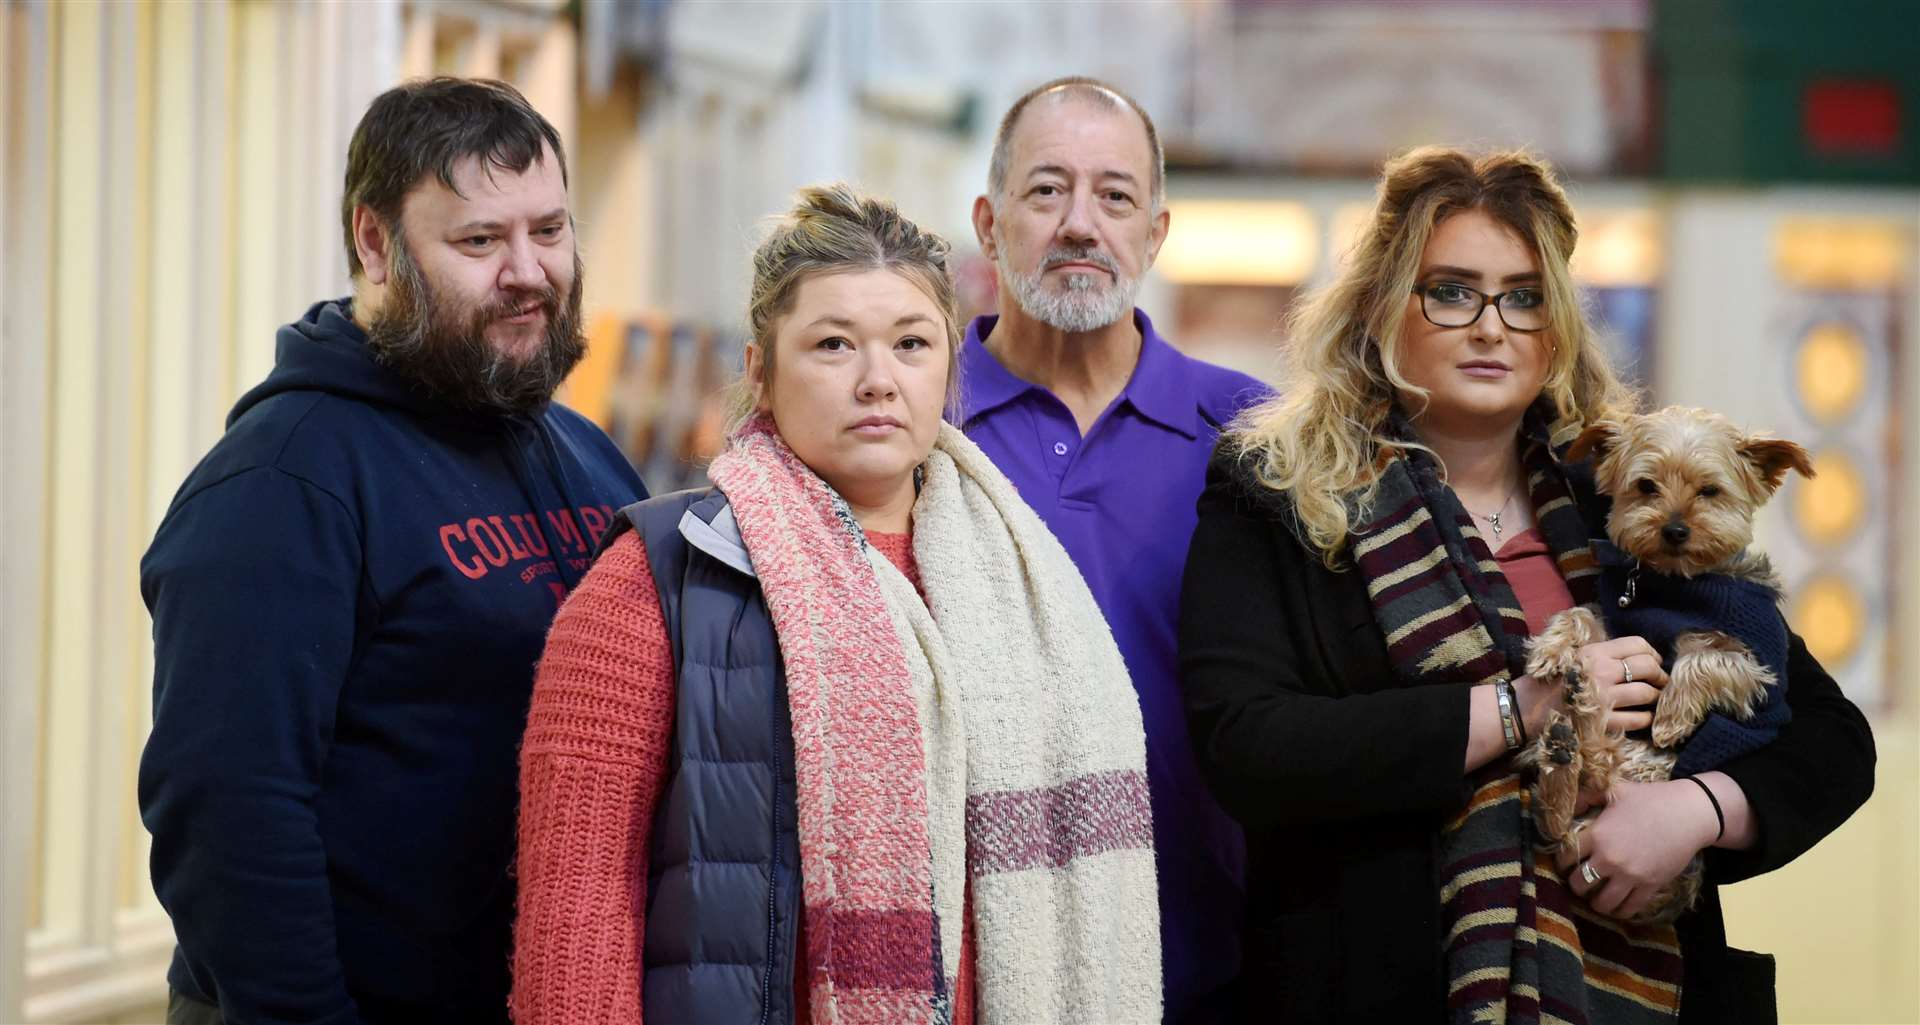 Thousands have signed a petition supporting traders such as Kasia Pogo (second left) facing eviction from the market and fish hall.